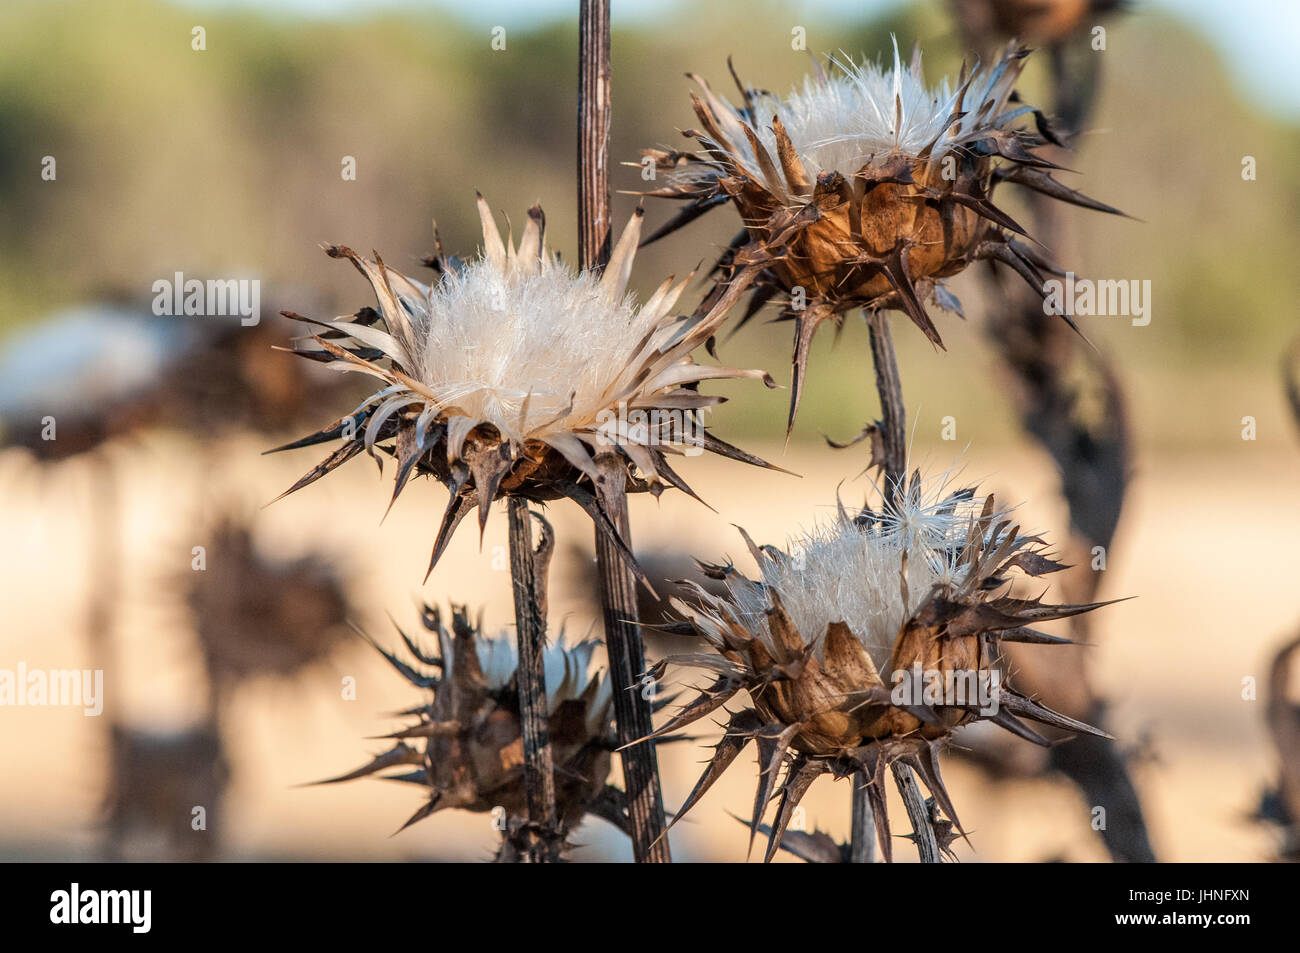 Dry thistle in foreground with blurred background in a summer day Stock Photo